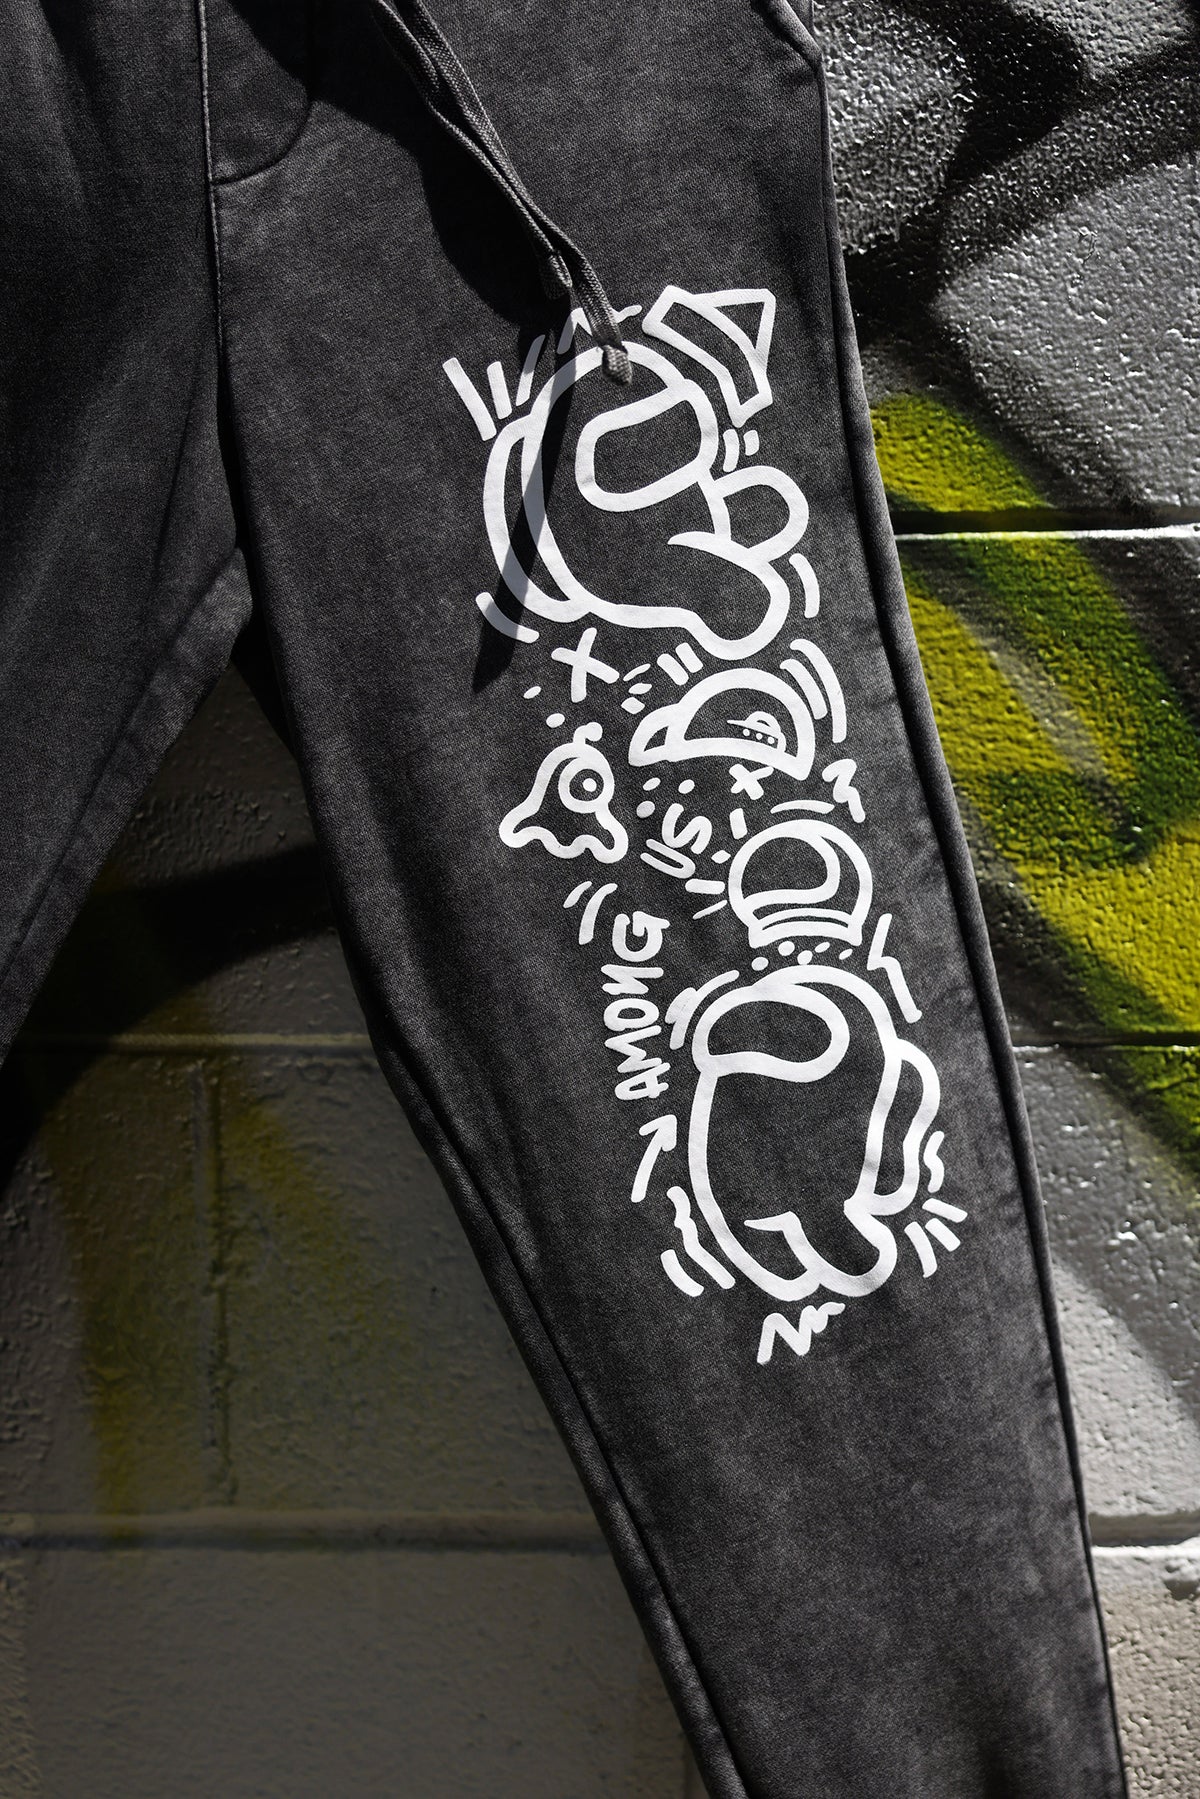 A zoomed in close up shot of the screenprinted Crewmate pattern against a graffitied background.